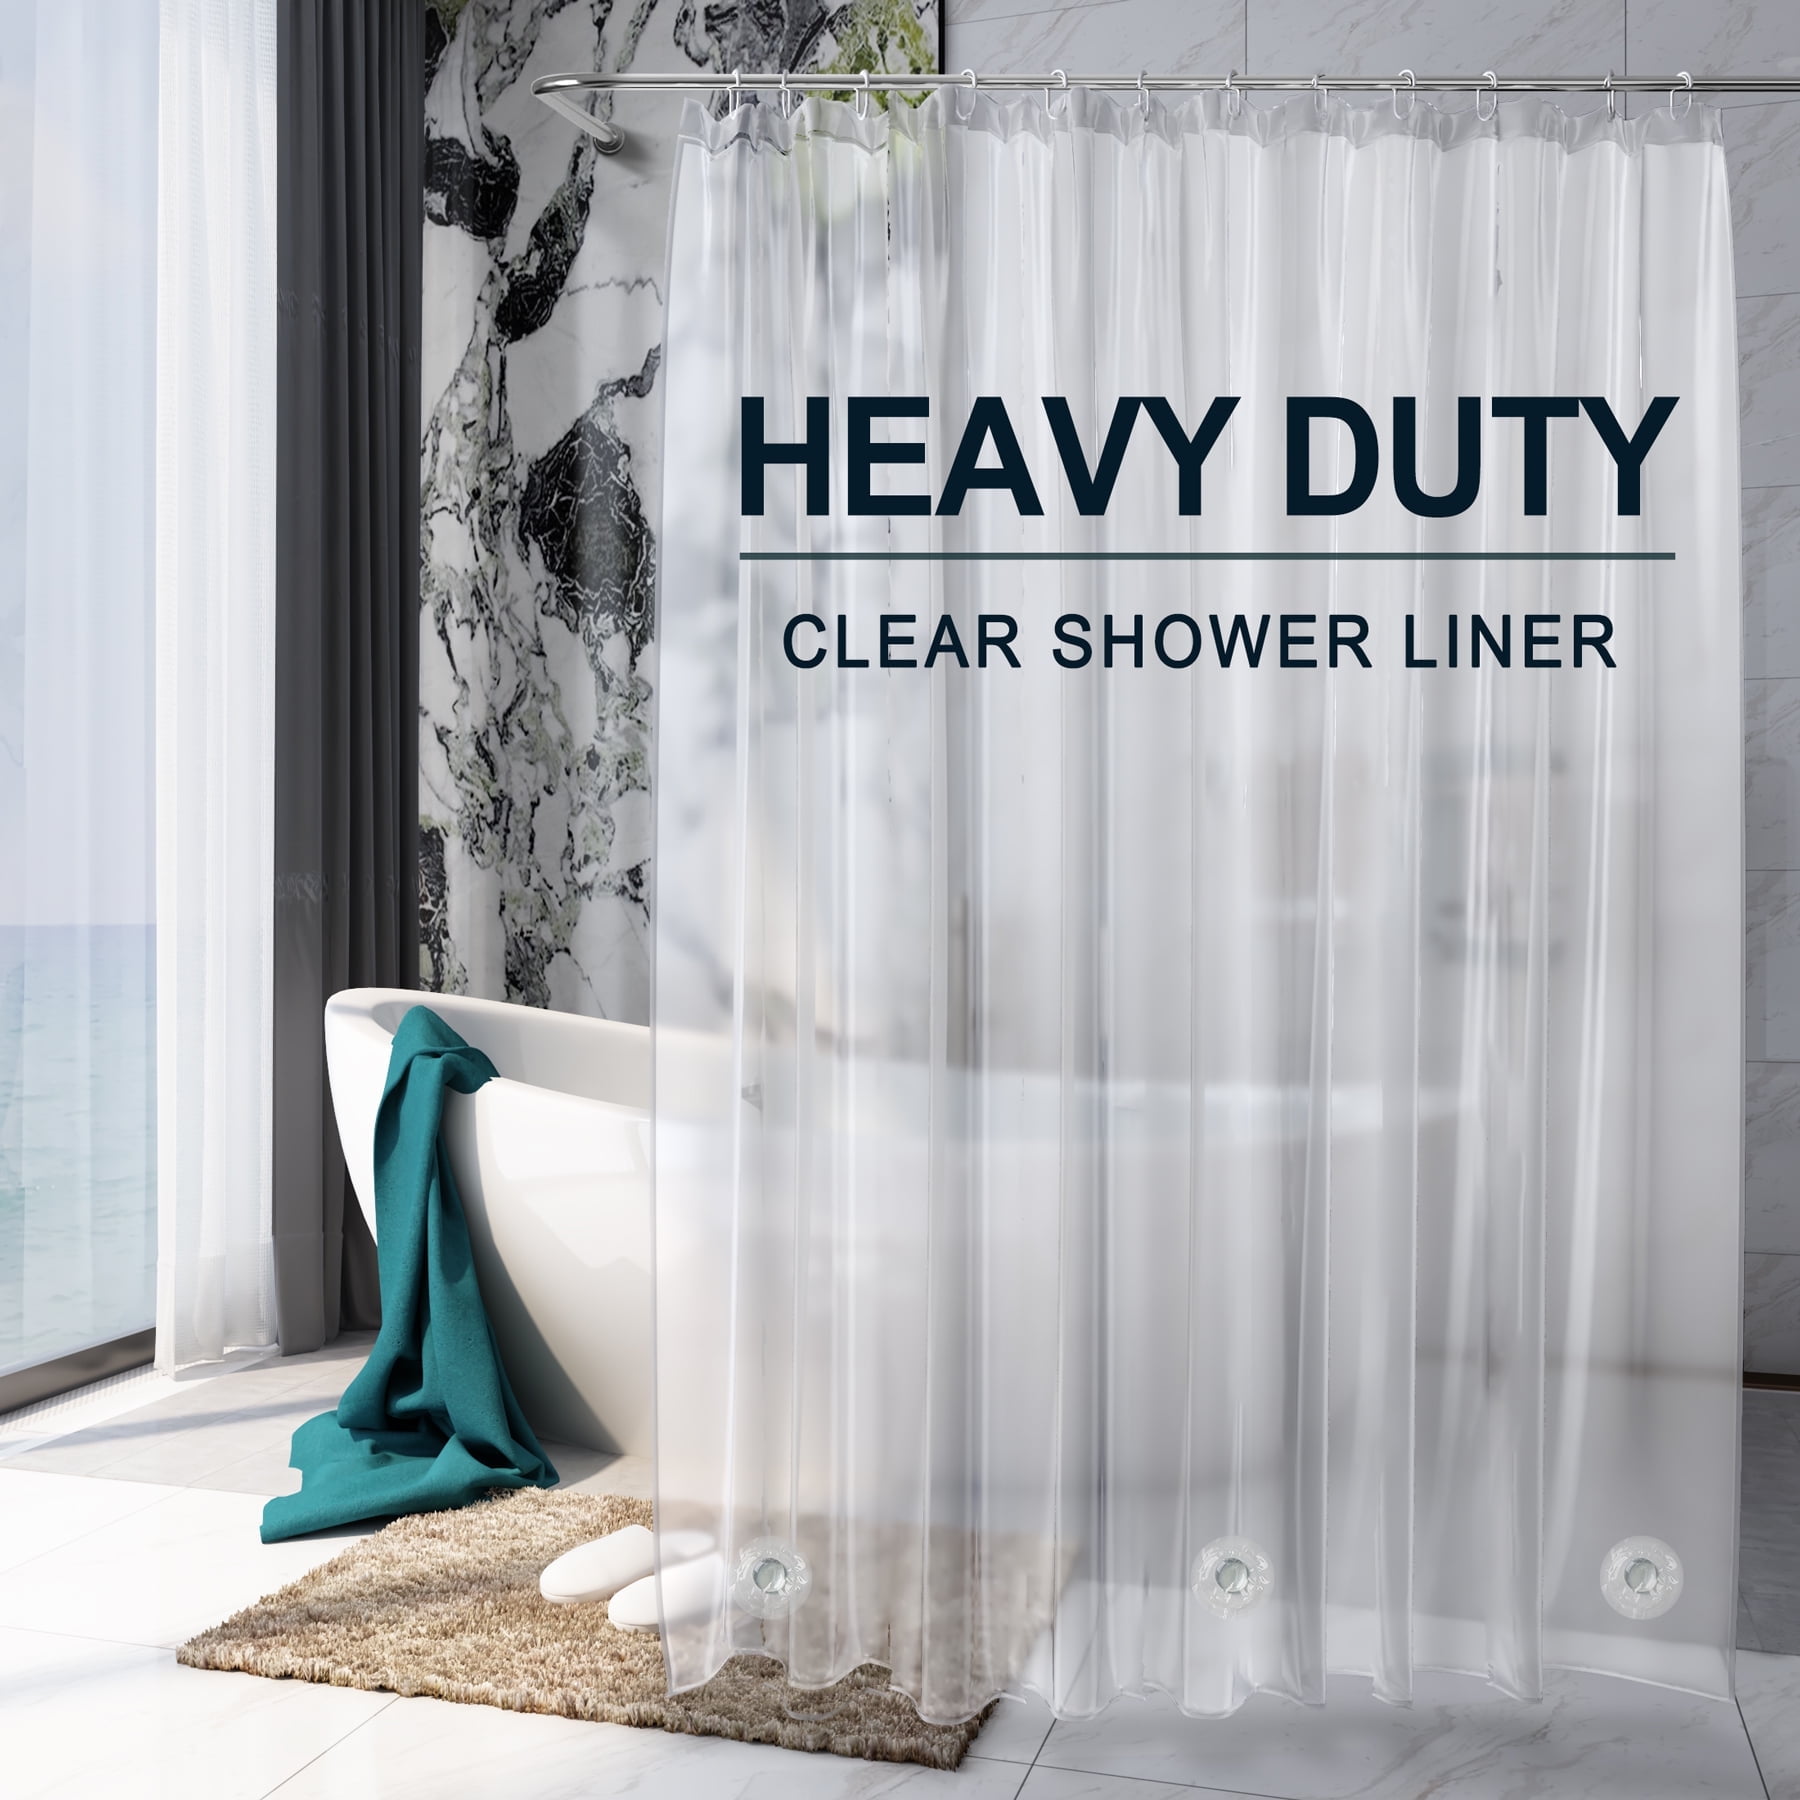 AmazerBath Heavy Duty Shower Curtain Liner 12 Gauge, 72 x 84 Inches Clear  Shower Curtain Liner with 3 Clear Stones and 12 Grommet Holes, Weighted